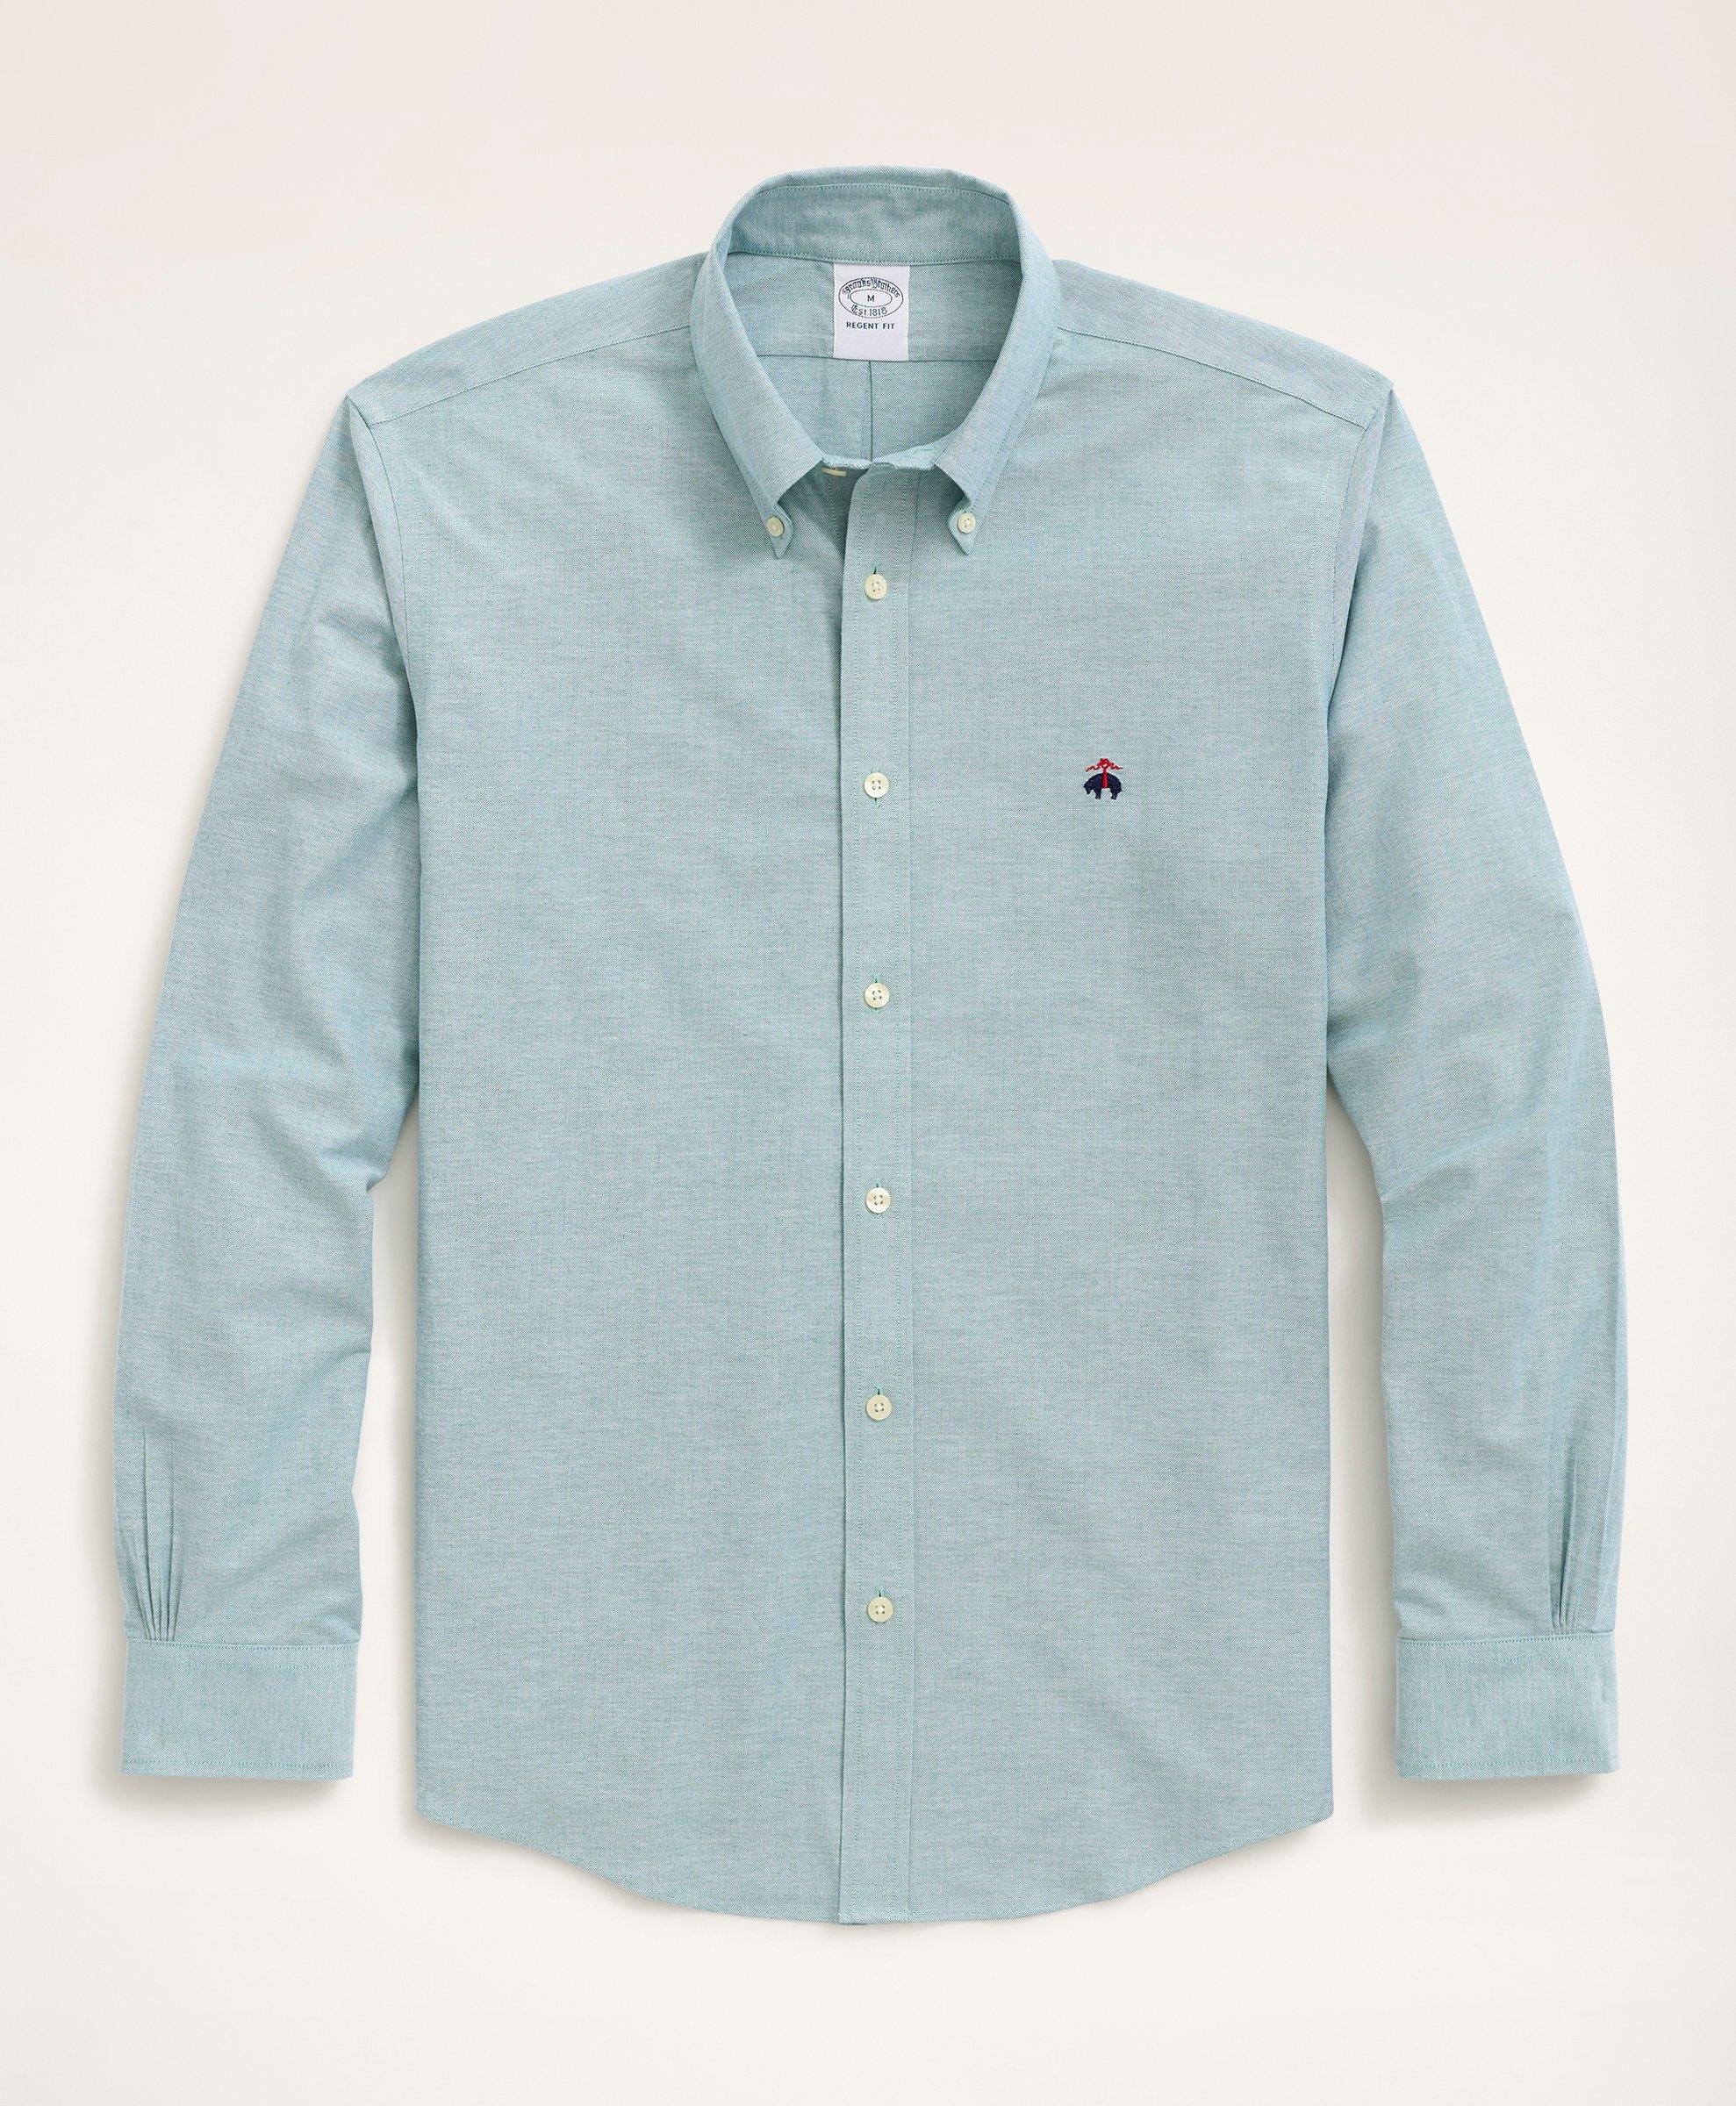 Brooks Brothers Stretch Regent Regular-fit Sport Shirt, Non-iron Oxford Button Down Collar | Teal | Size Xs